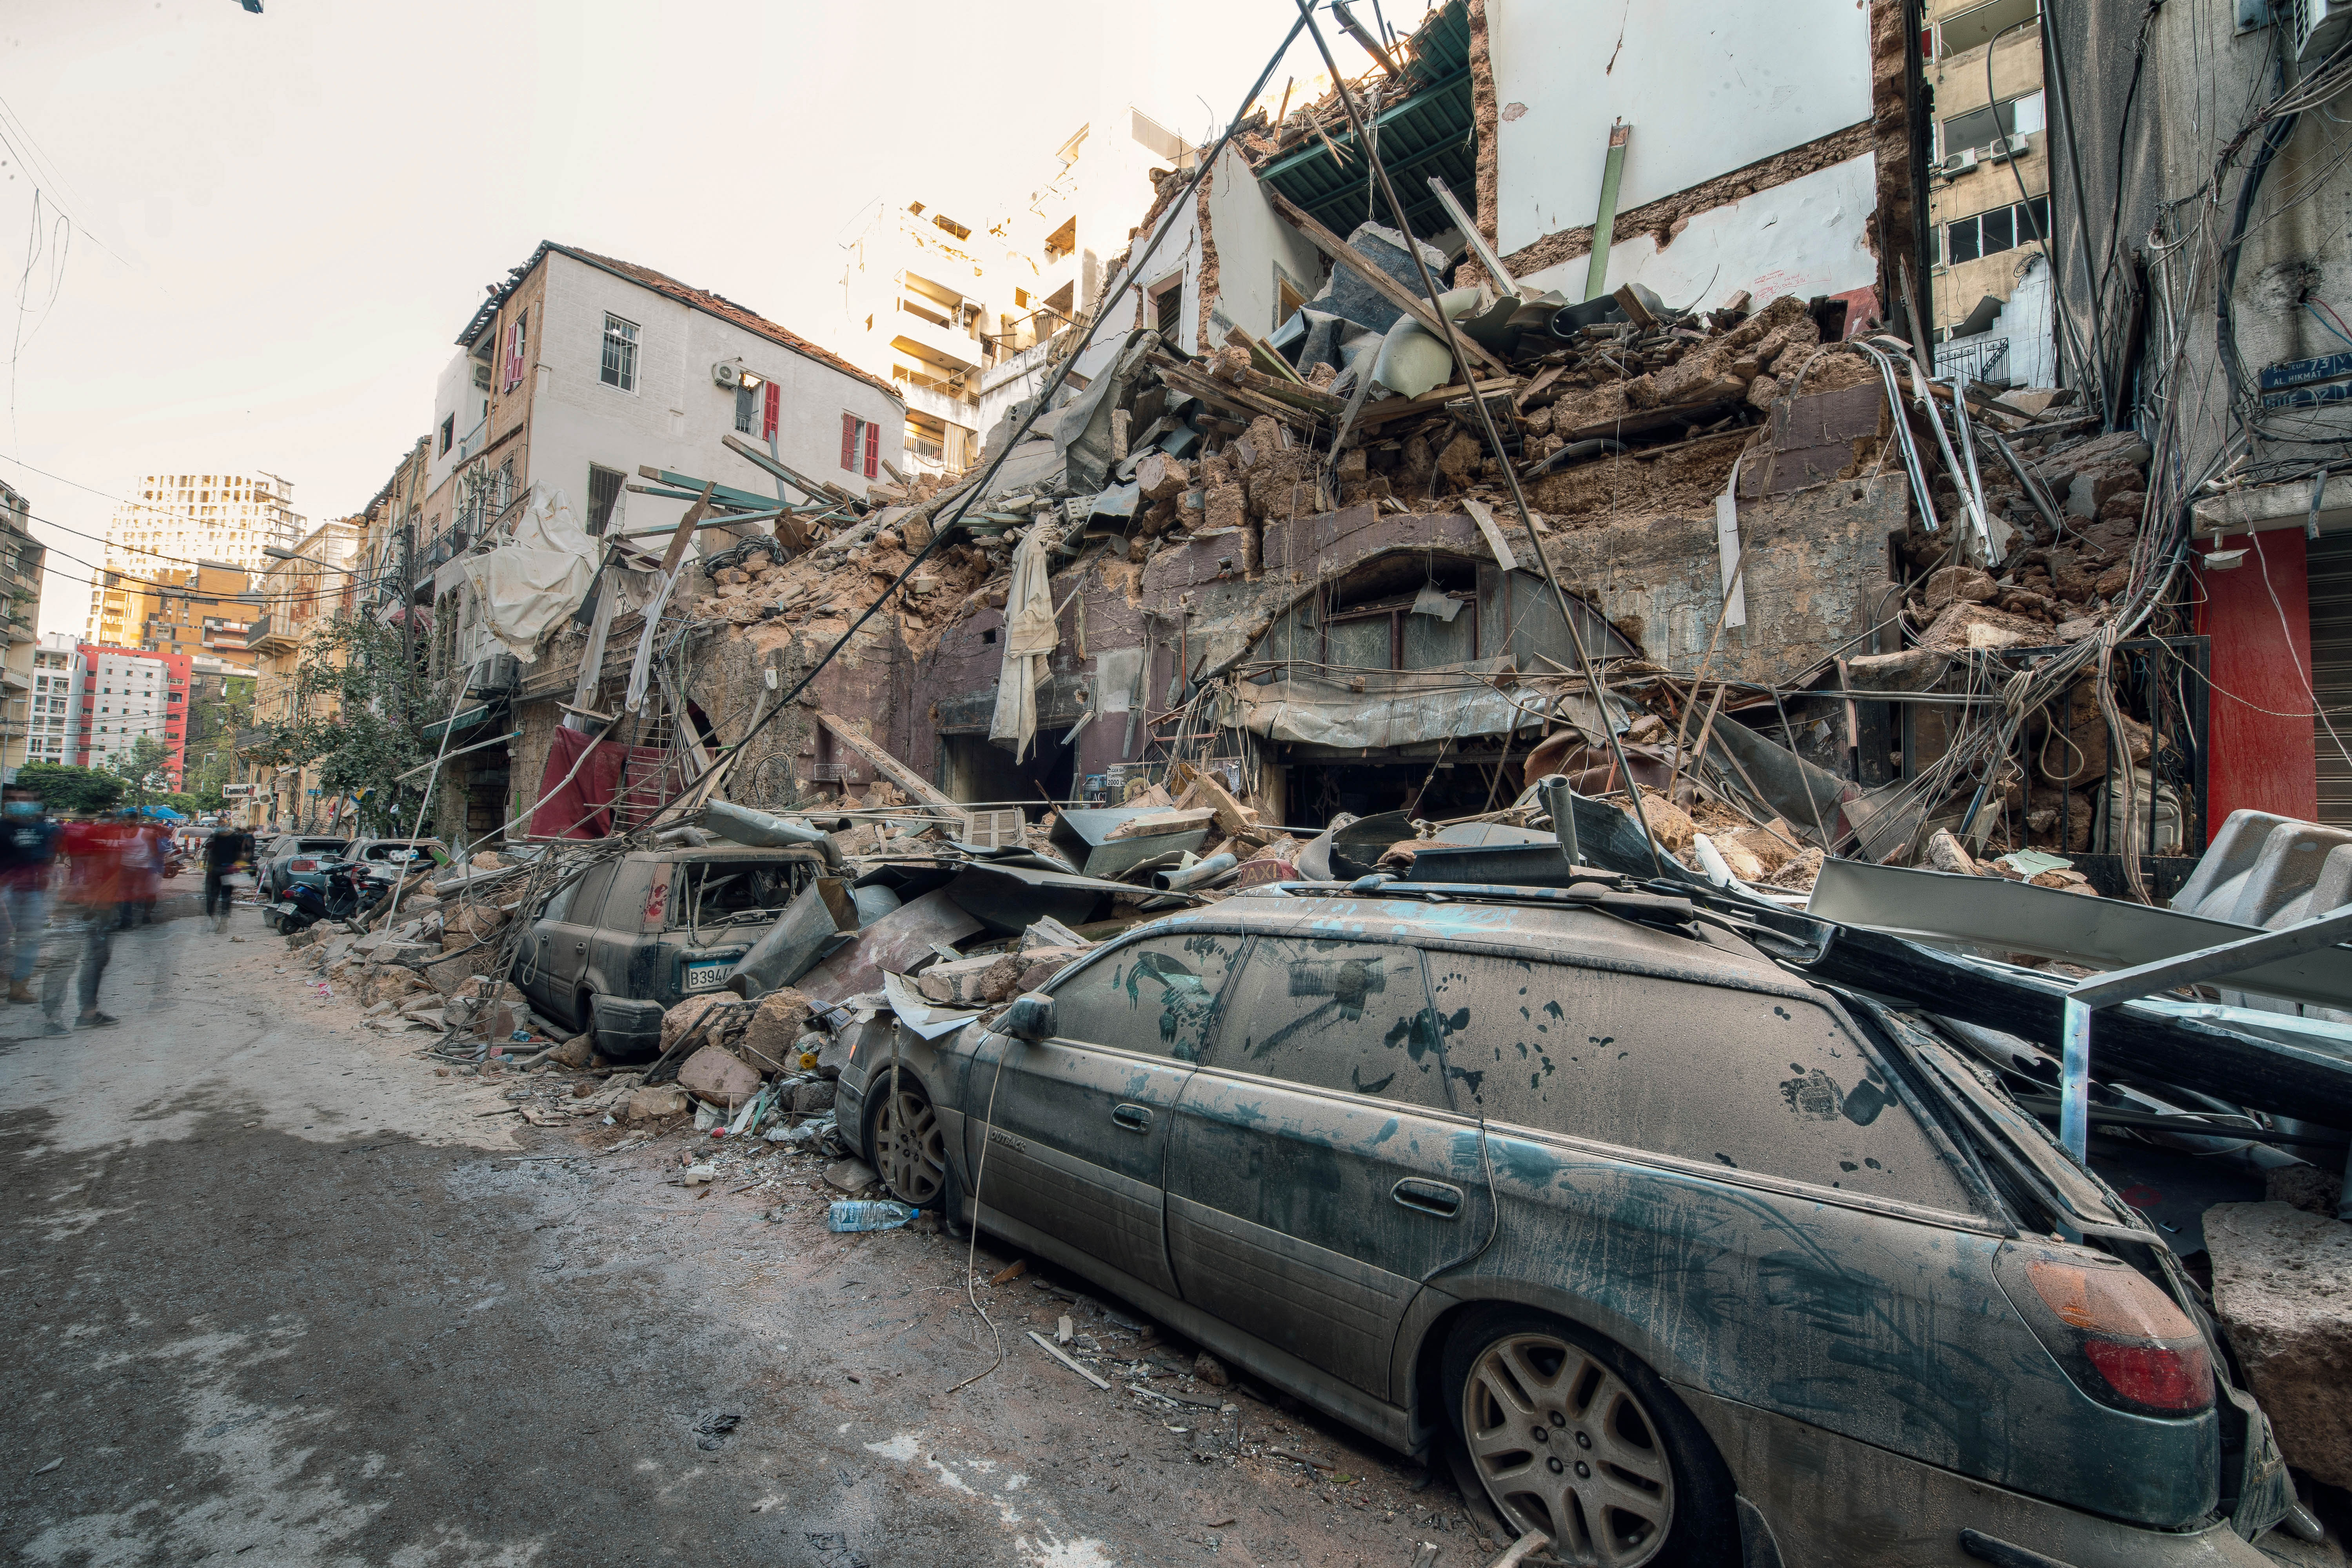 Debris from collapsed houses has fallen on a smashed car during the Beirut explosion